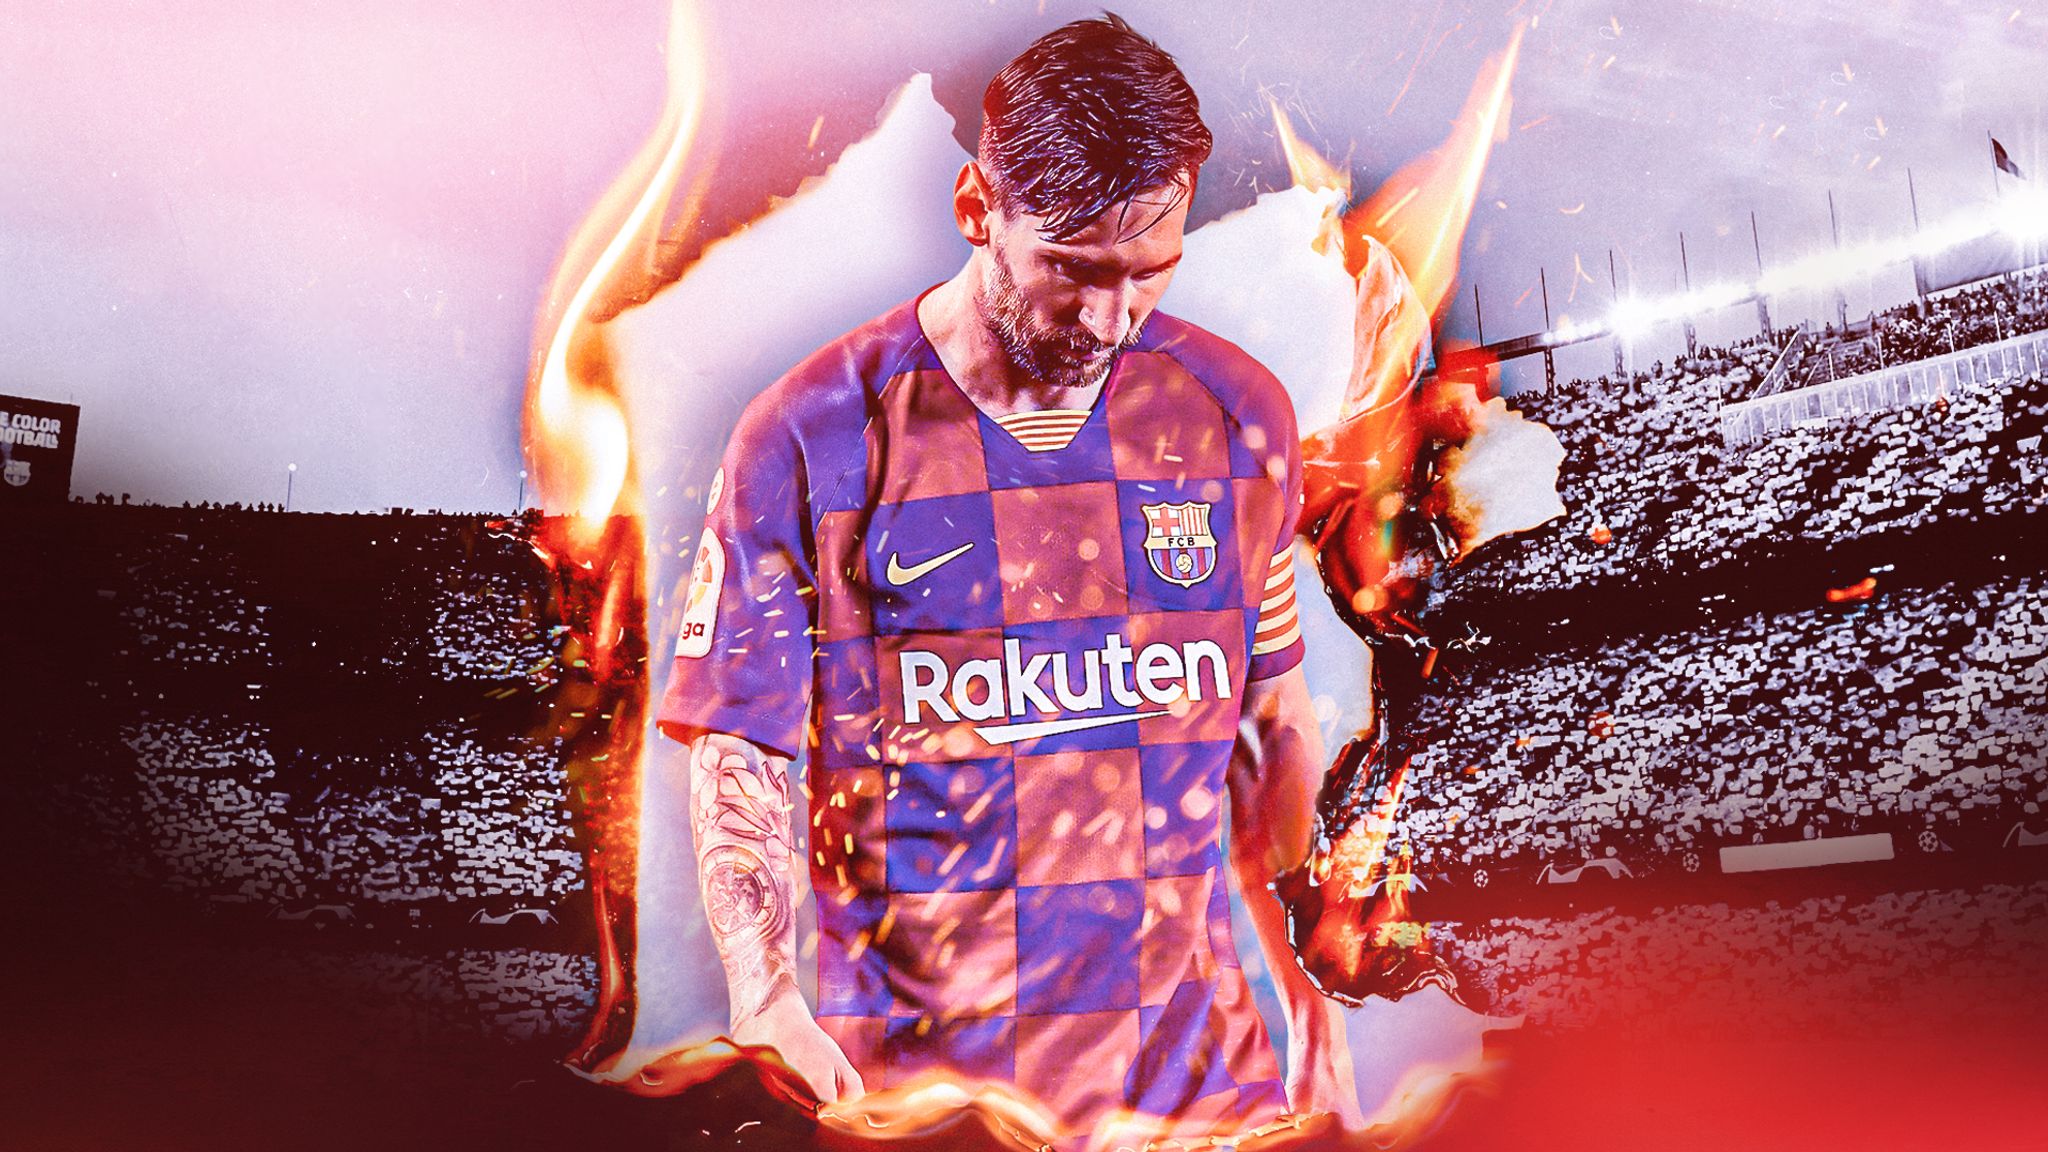 Lionel Messi contract situation explained: How can he leave Barcelona on a free?